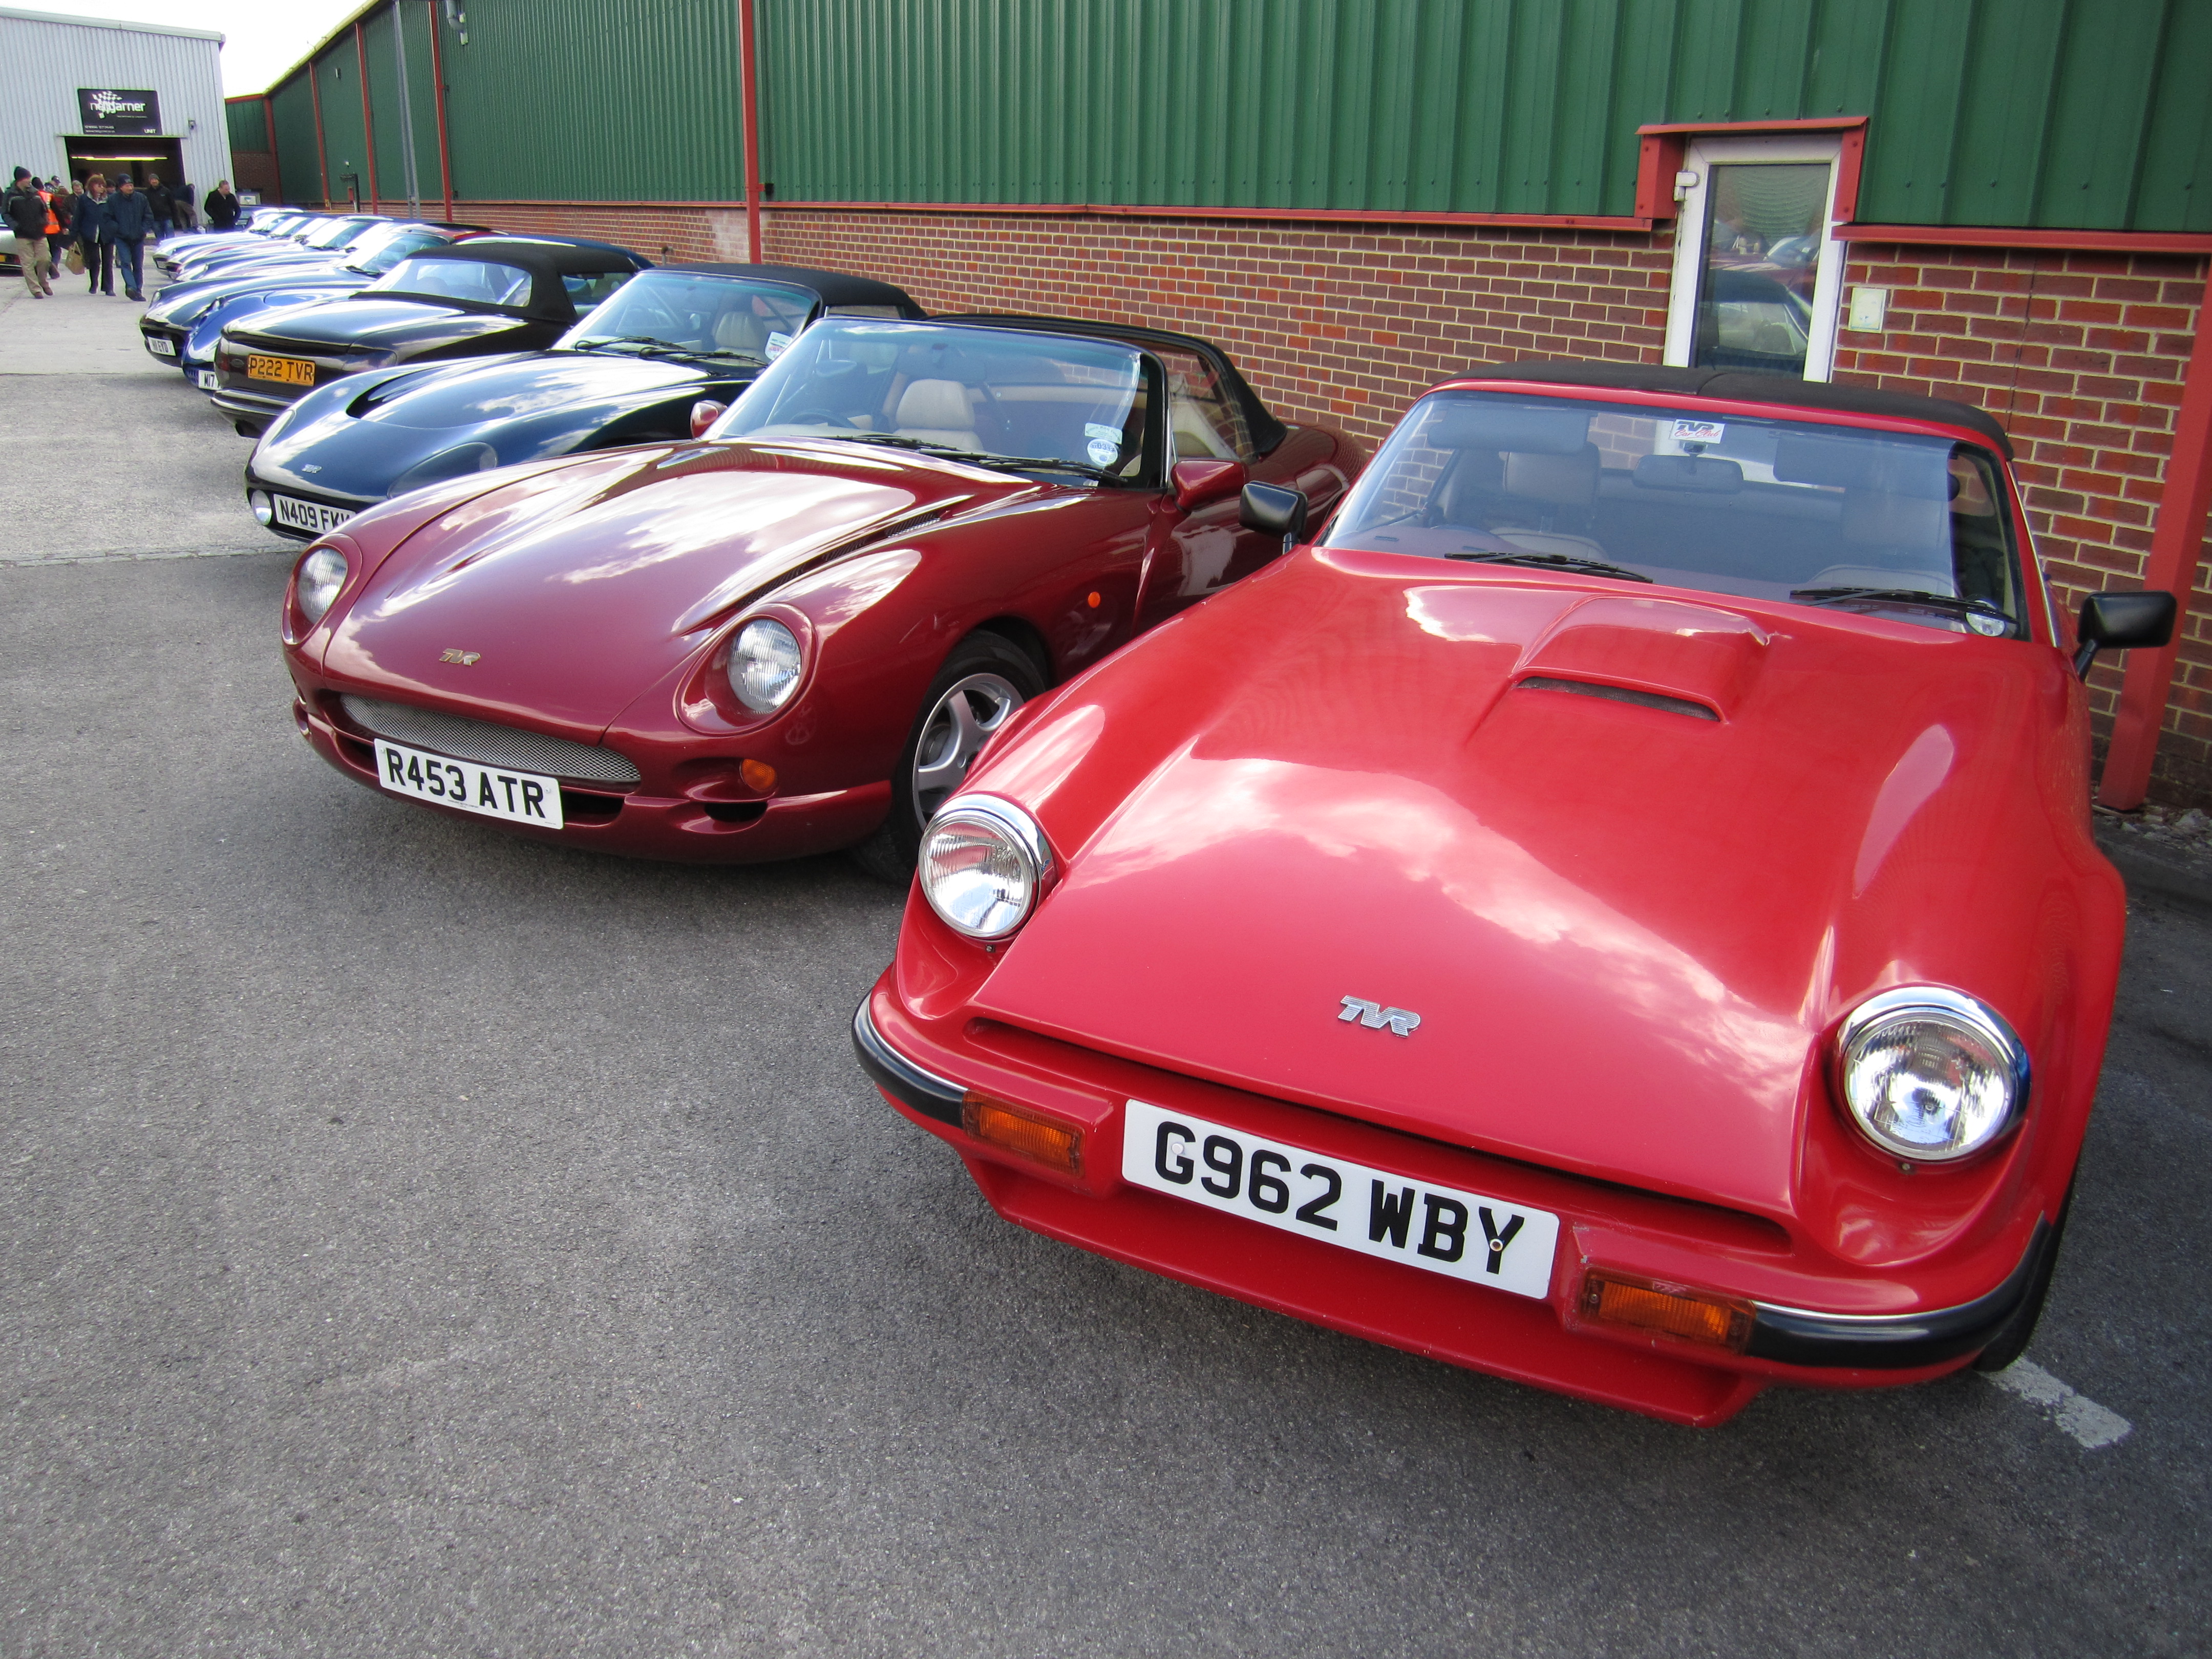 TVR’s lined up